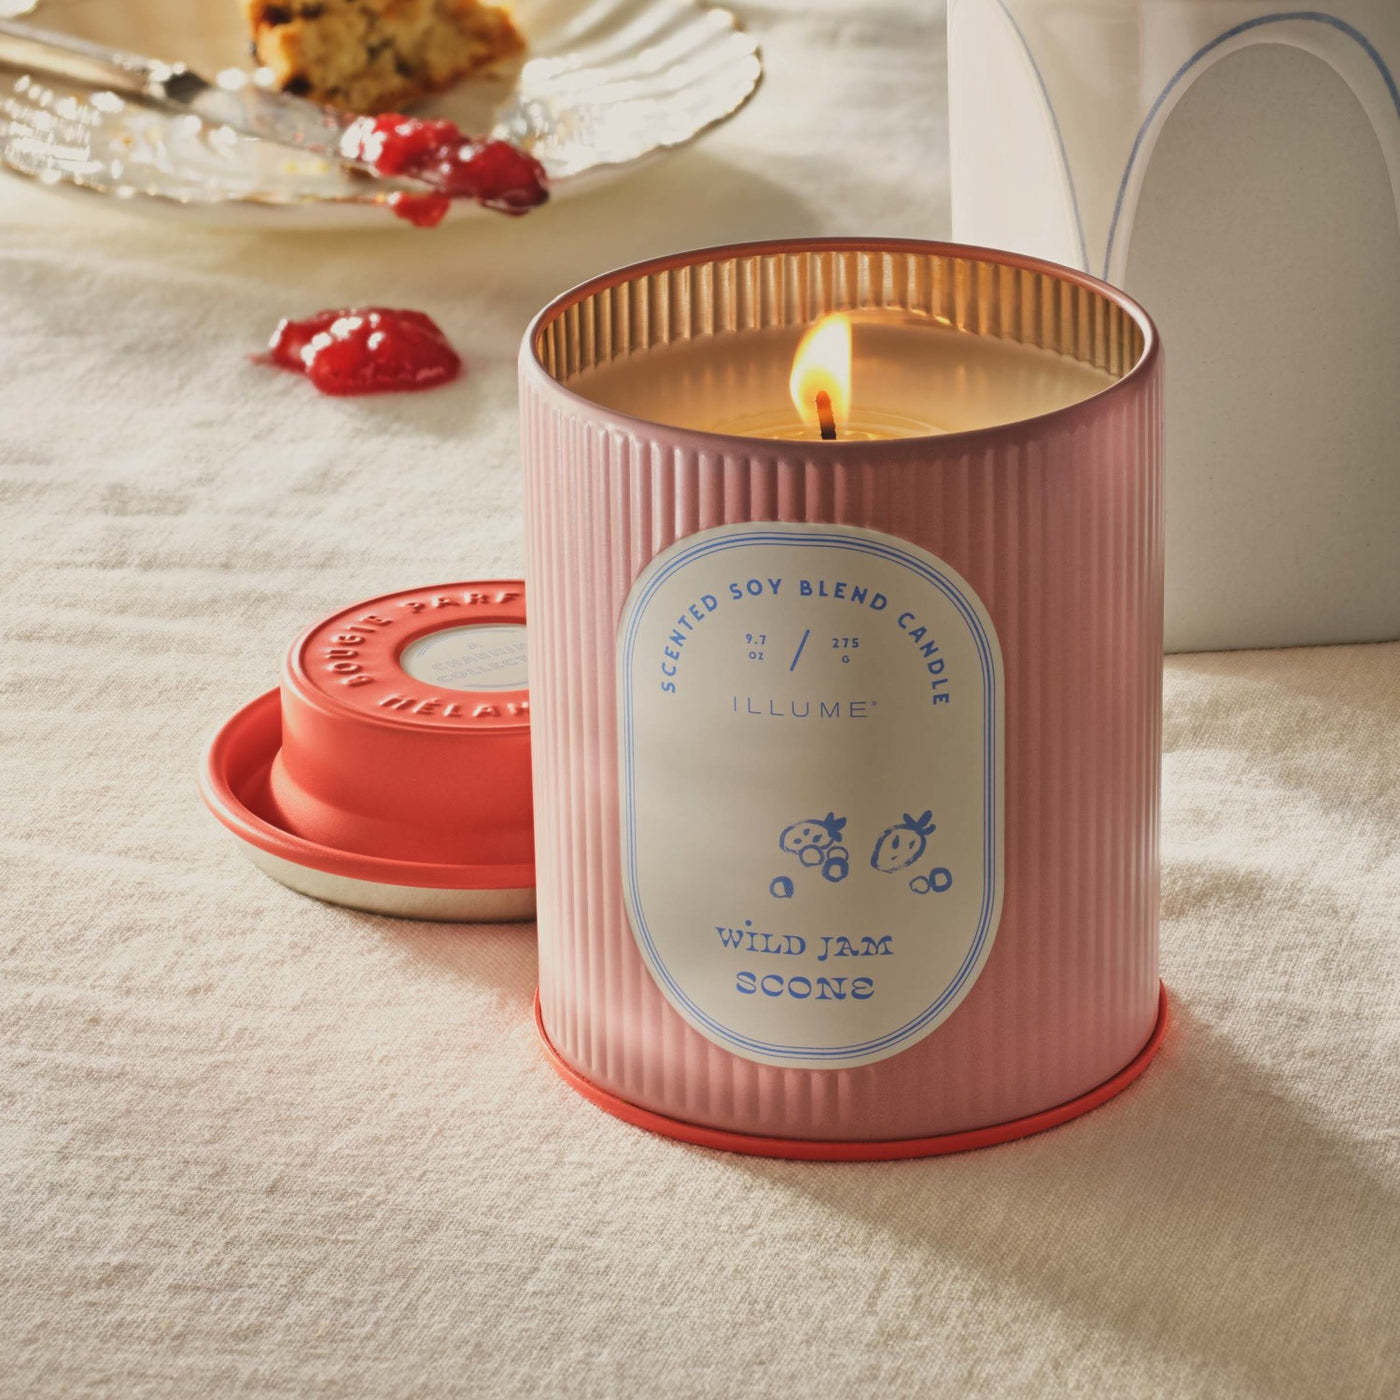 Wild Jam Scone Soy Candle